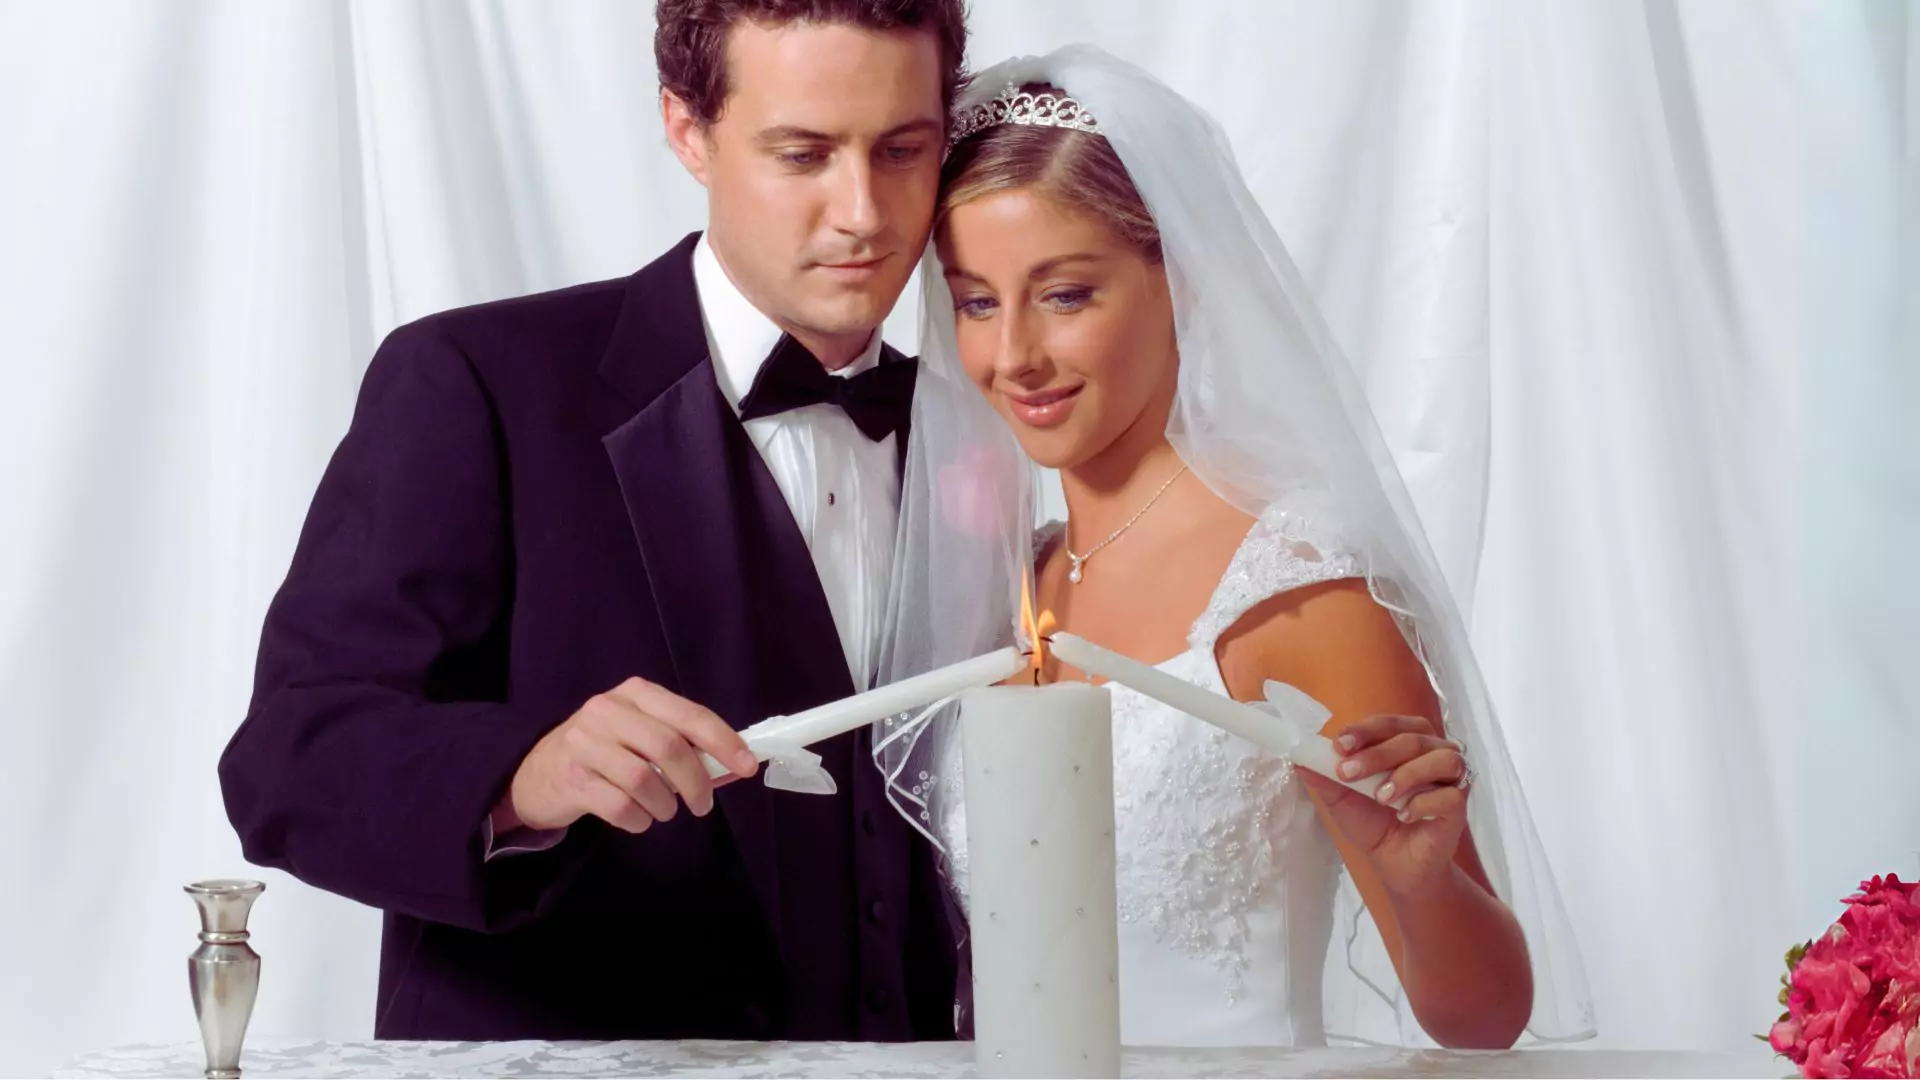 Photo of a man and woman lighting their unity candle during their marriage ceremony.